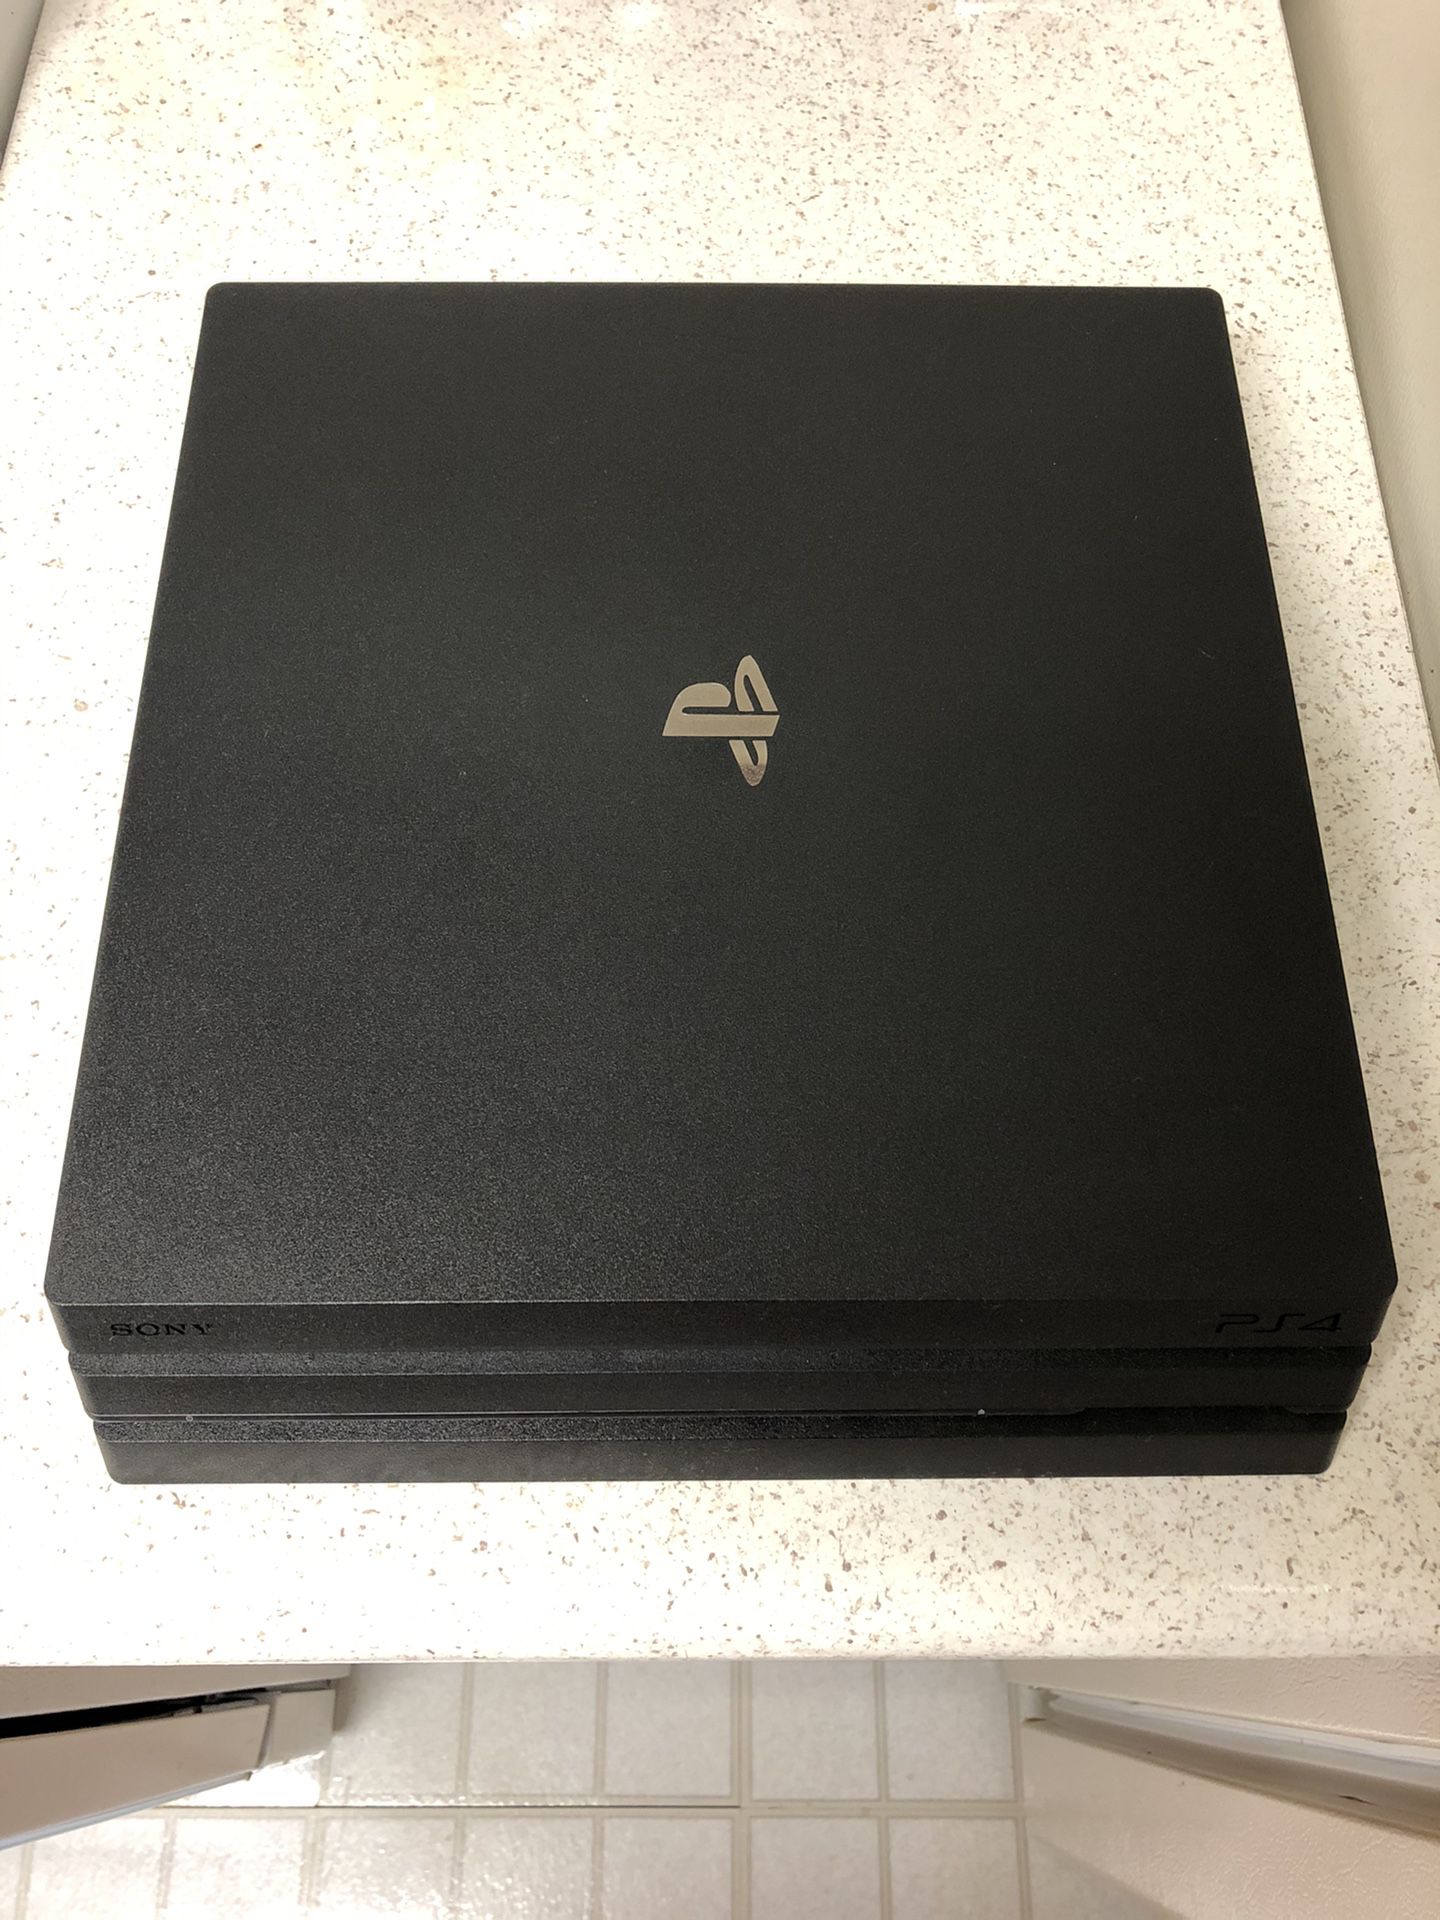 Playstation 4 Pro for sale